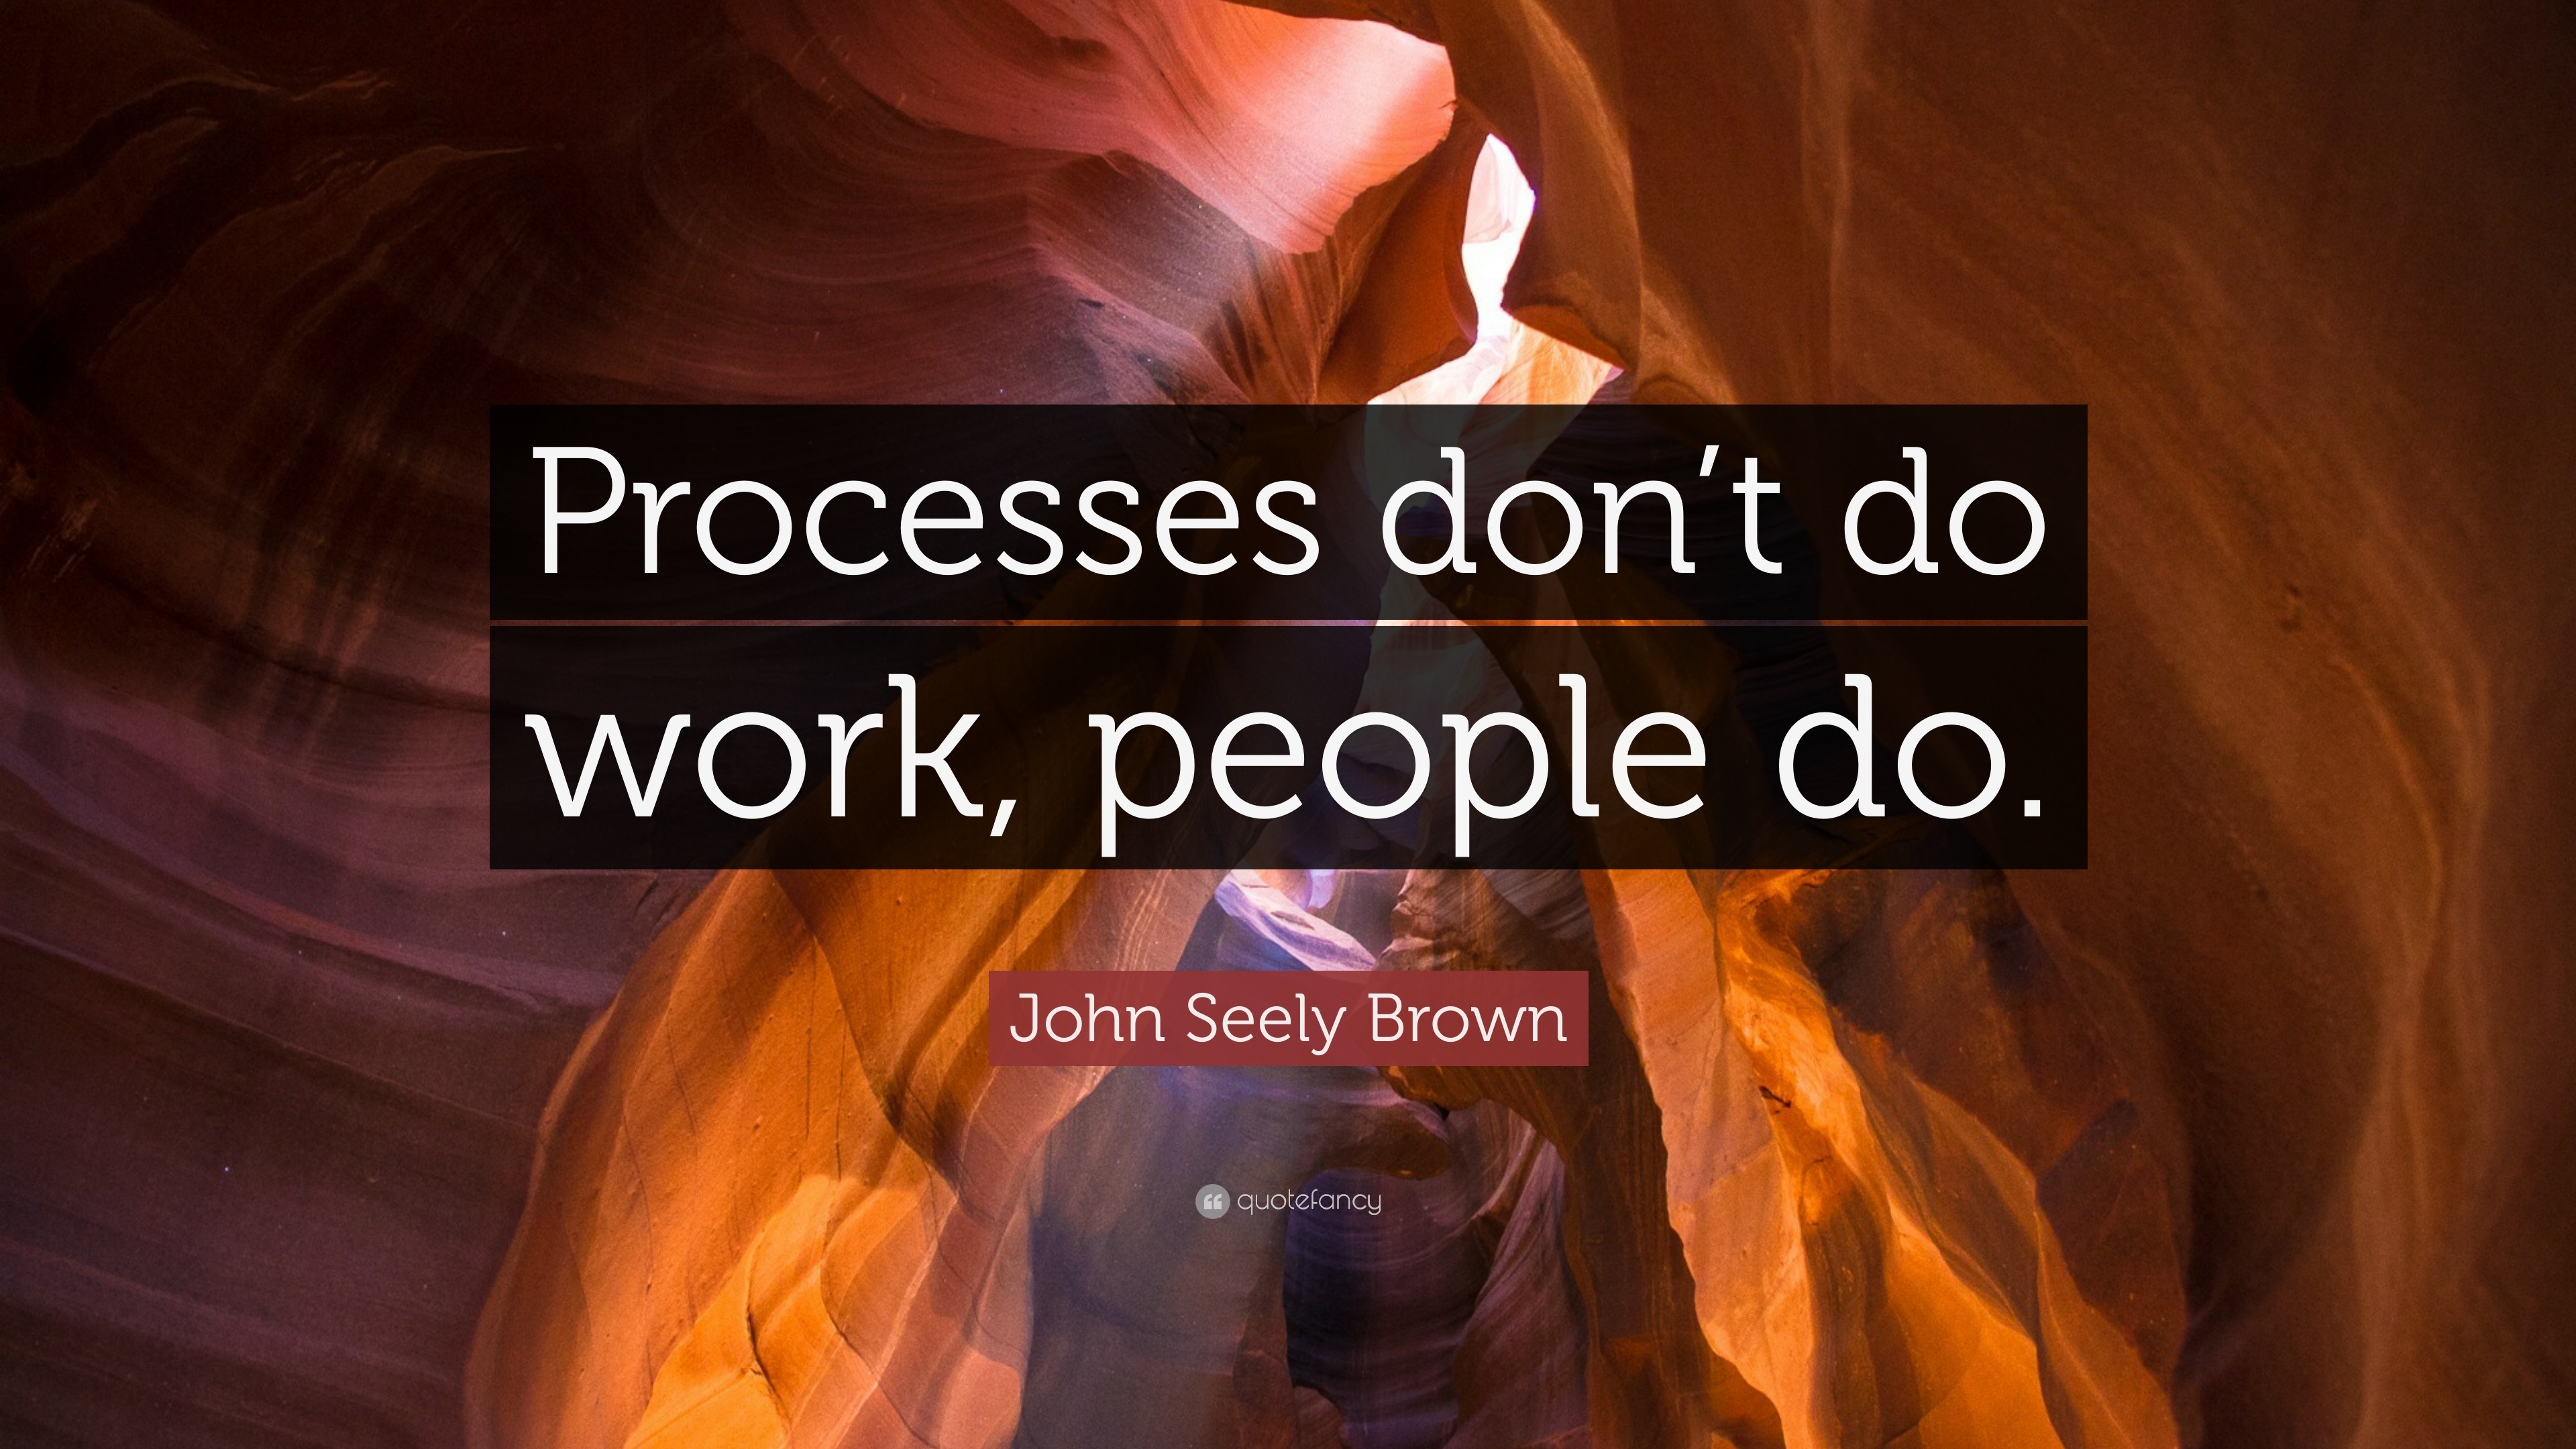 John Seely Brown Quote: “Processes don’t do work, people do.”